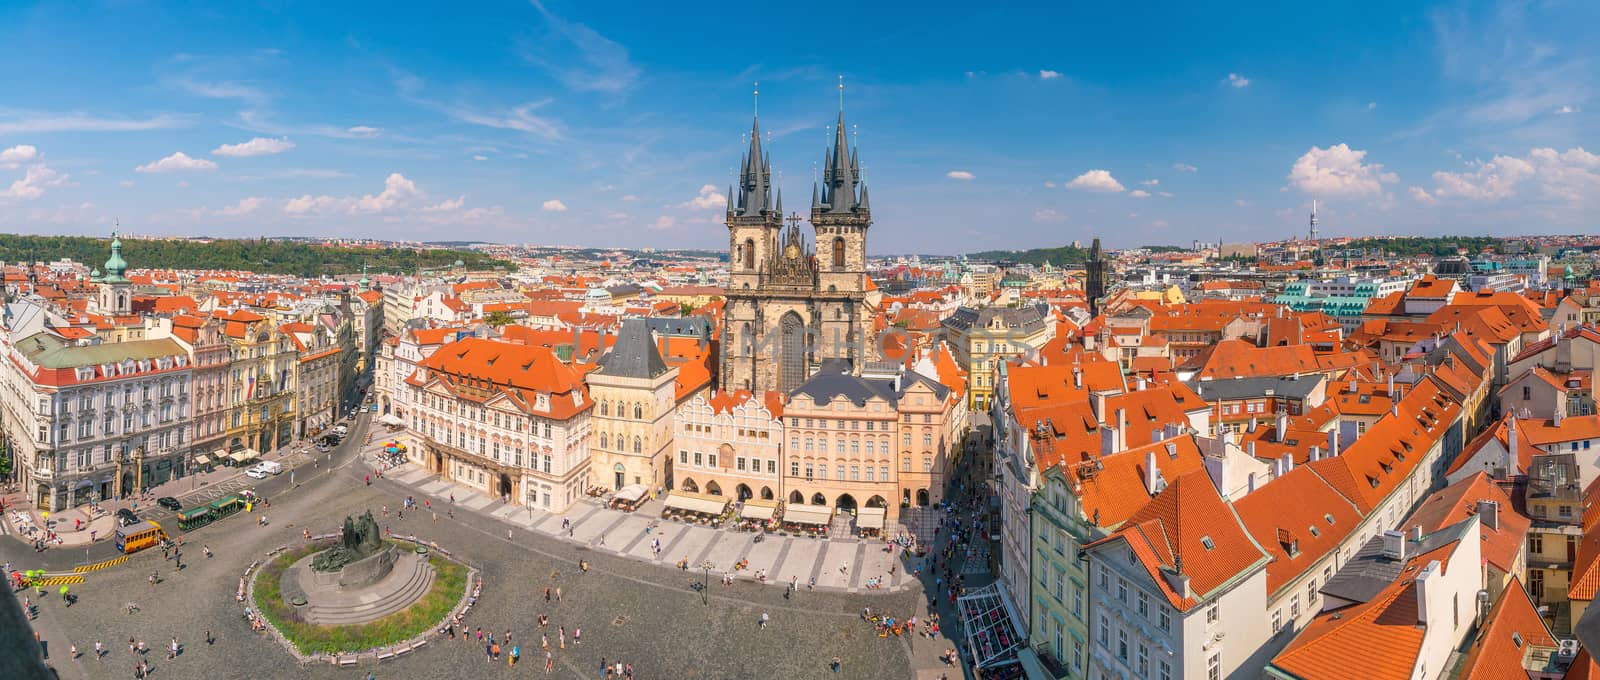 Old Town square with Tyn Church in Prague, Czech Republic 